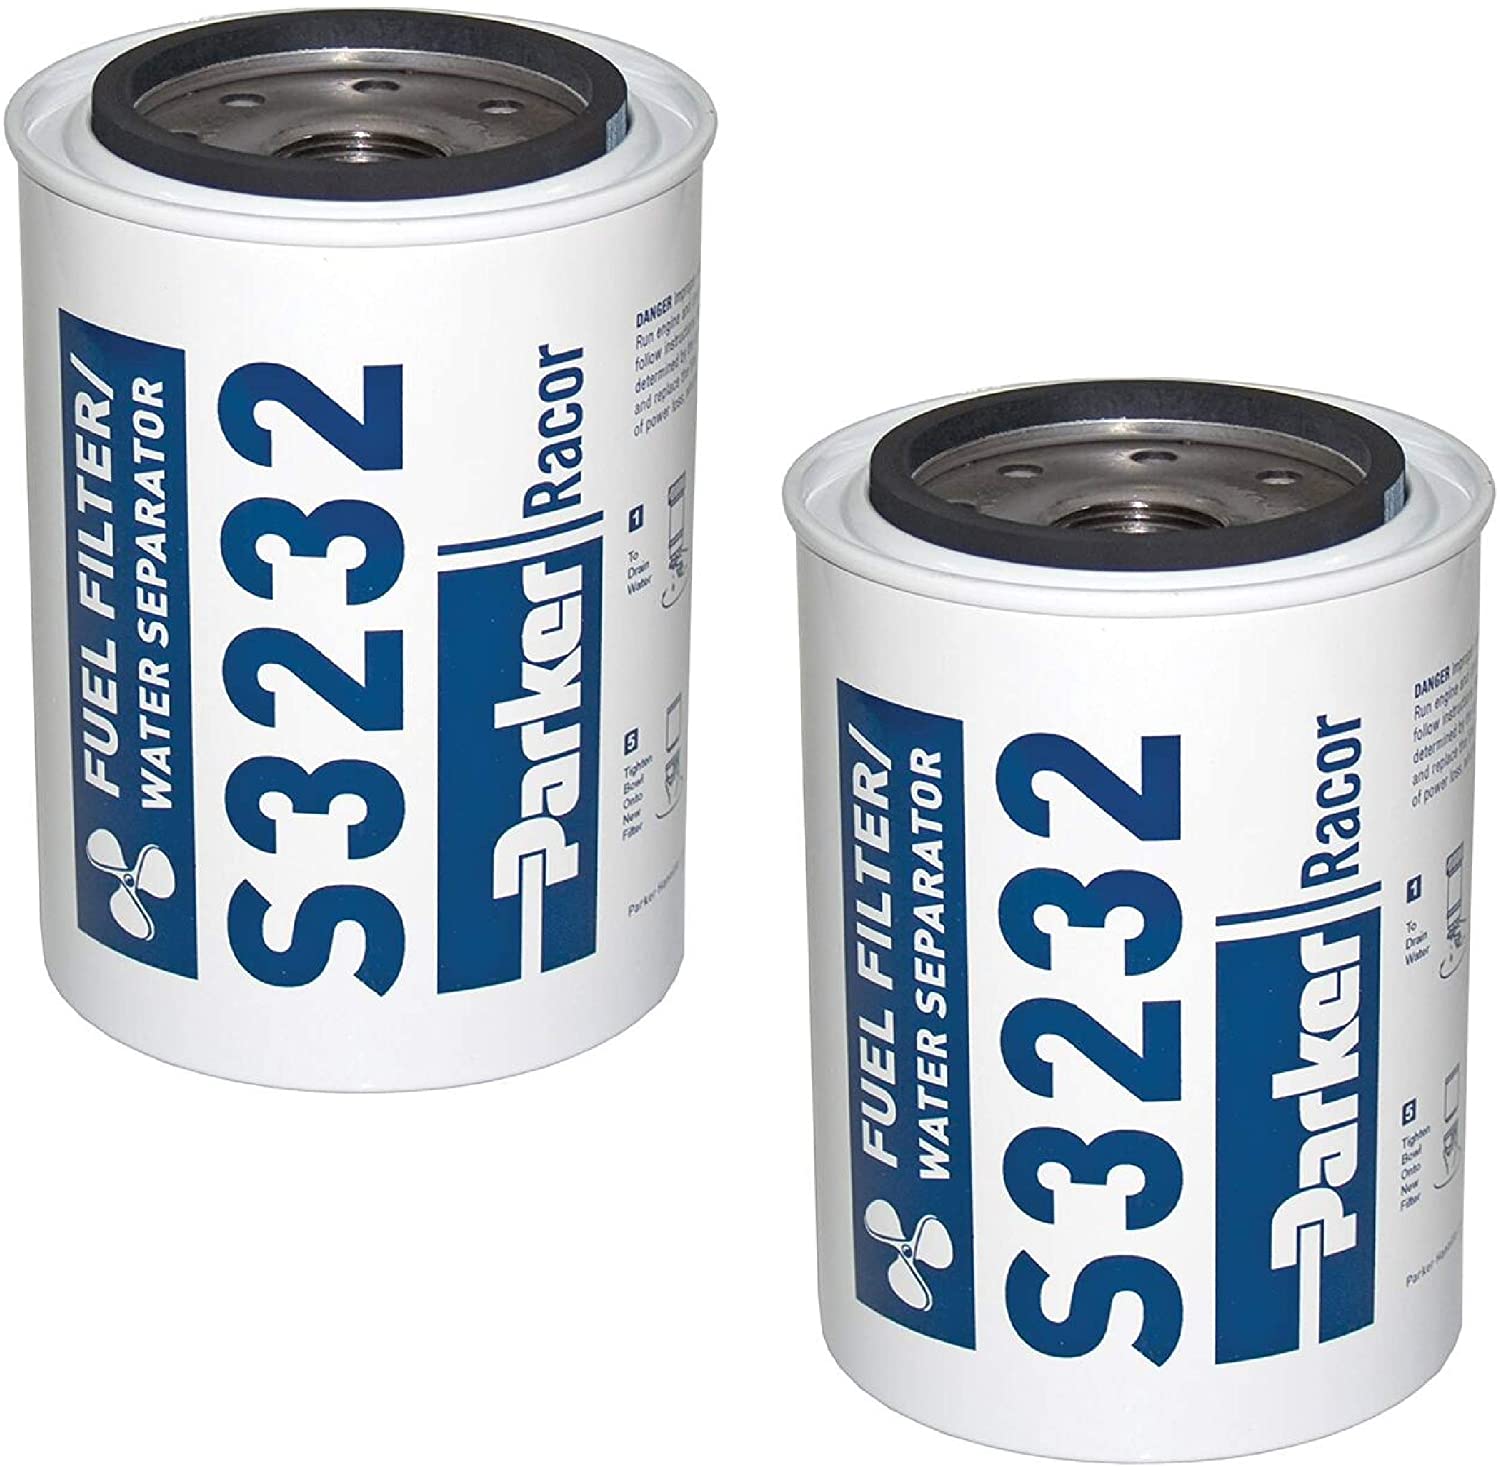 S3232 Racor Fuel Filter Water Sep Marine Cartridge (Pack of 2), 10Microns